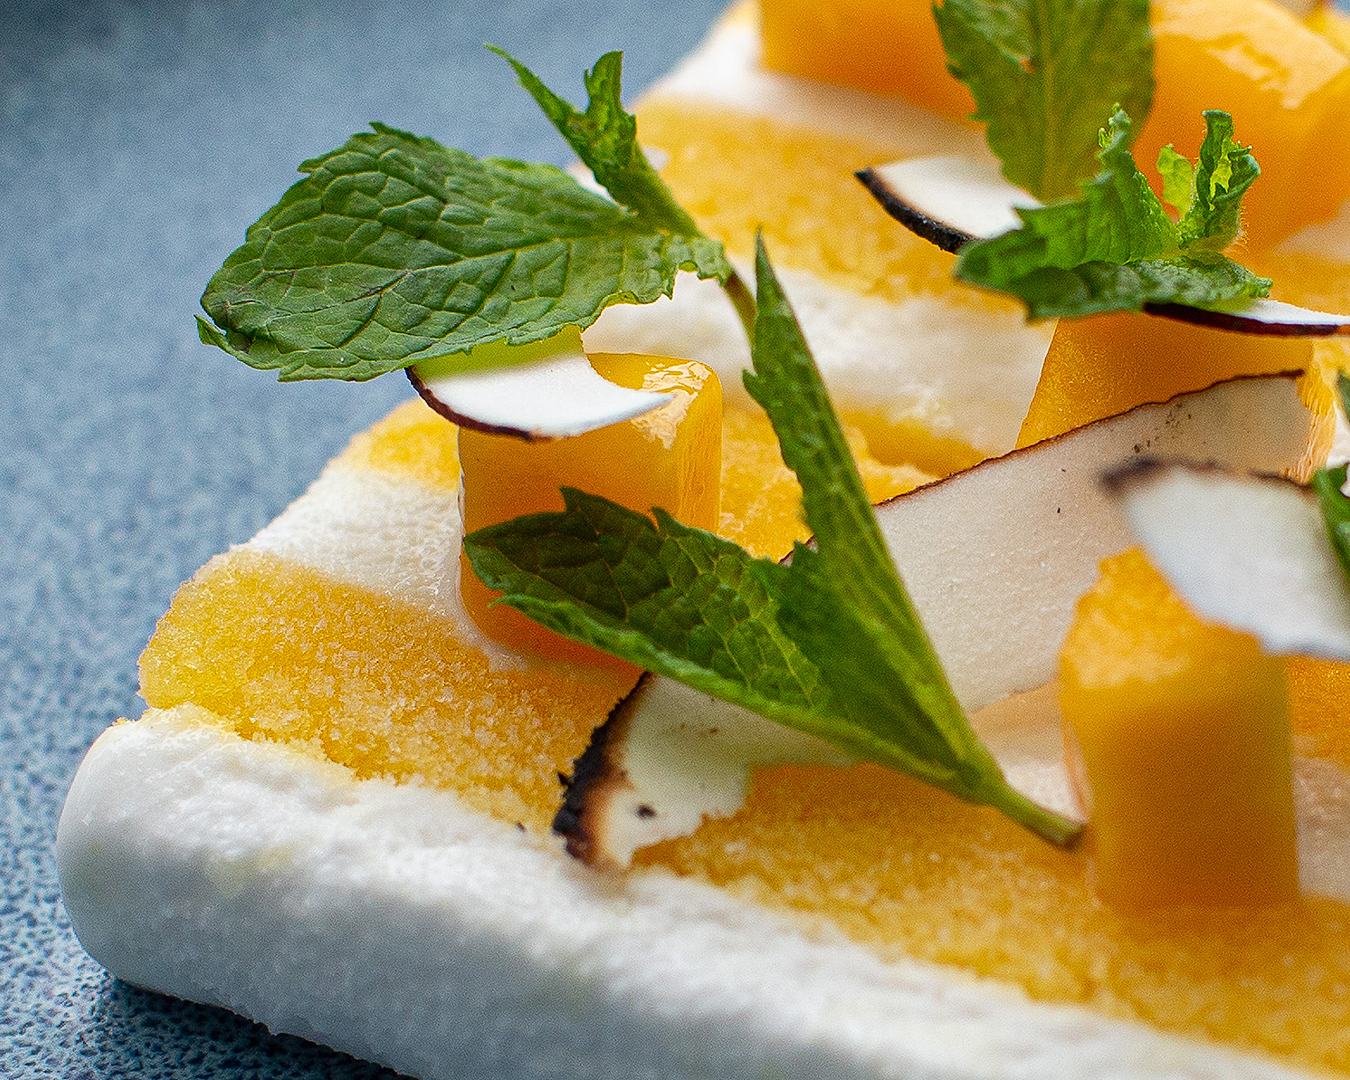 The taste bud tingling Yuzu slice, a bright yellow and white frozen dessert with leaves delicately placed on top.